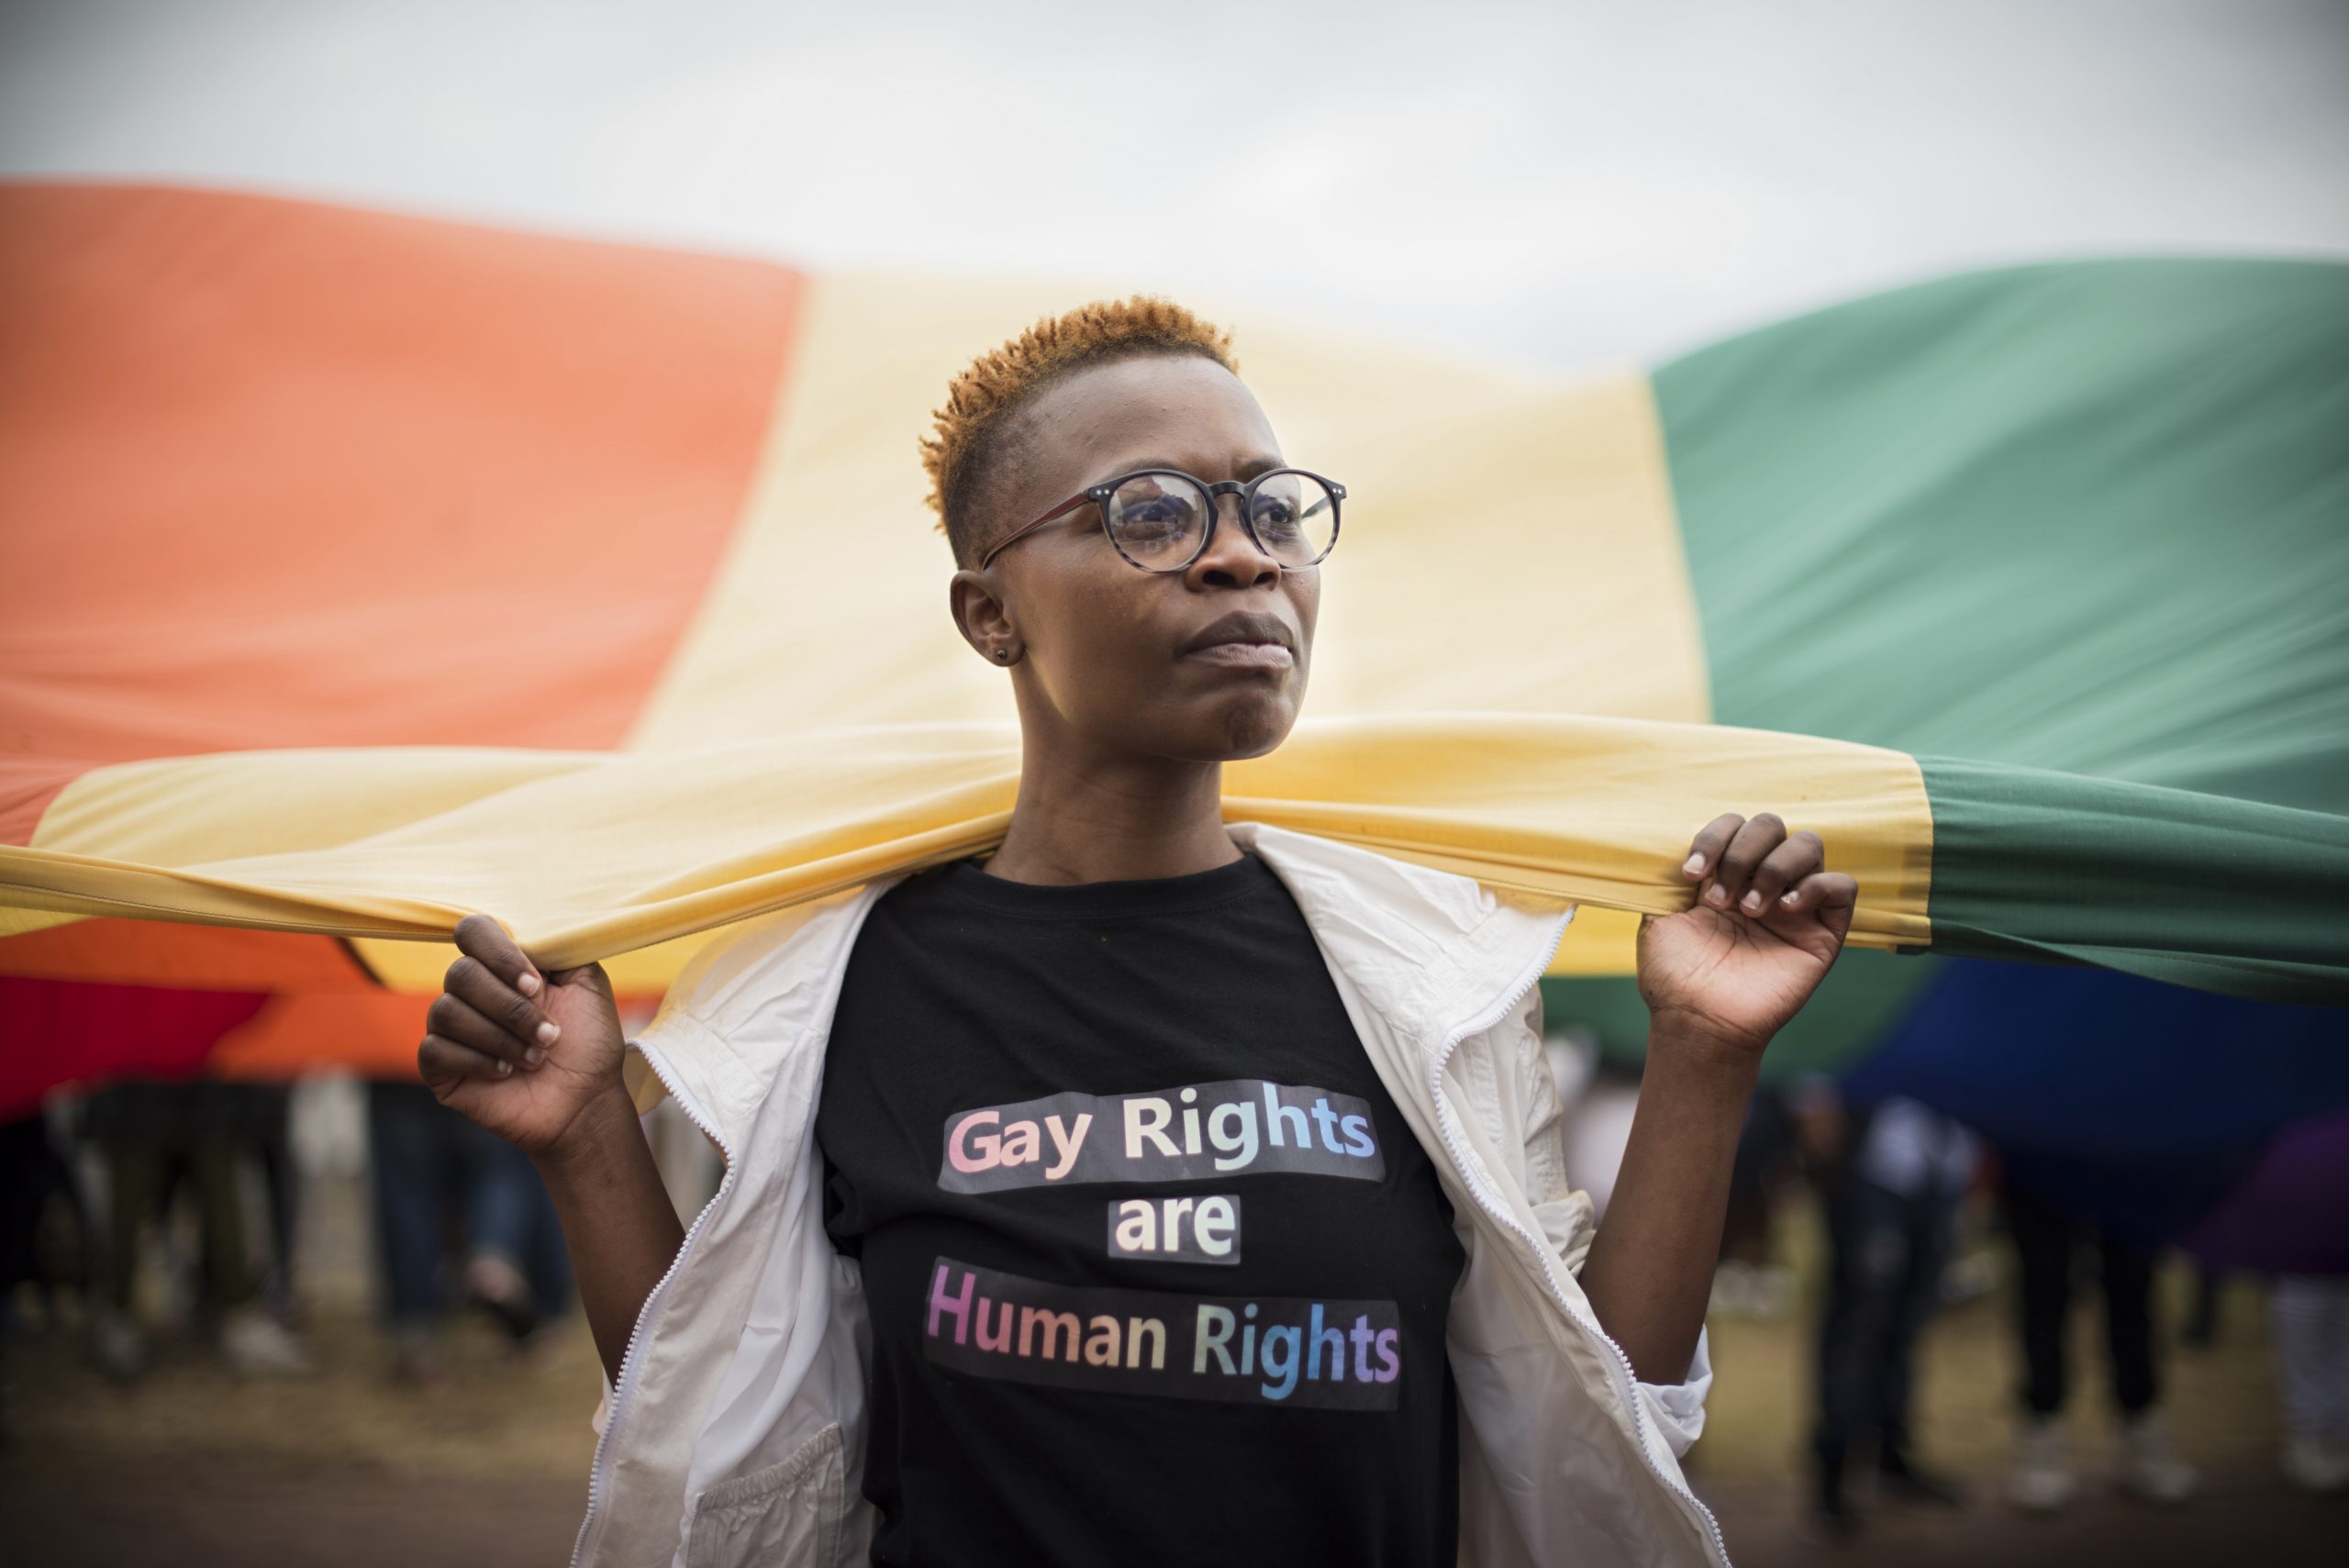 Submission to the UN Committee Against Torture Highlights Violence against LGBTIQ+ Persons in Kenya